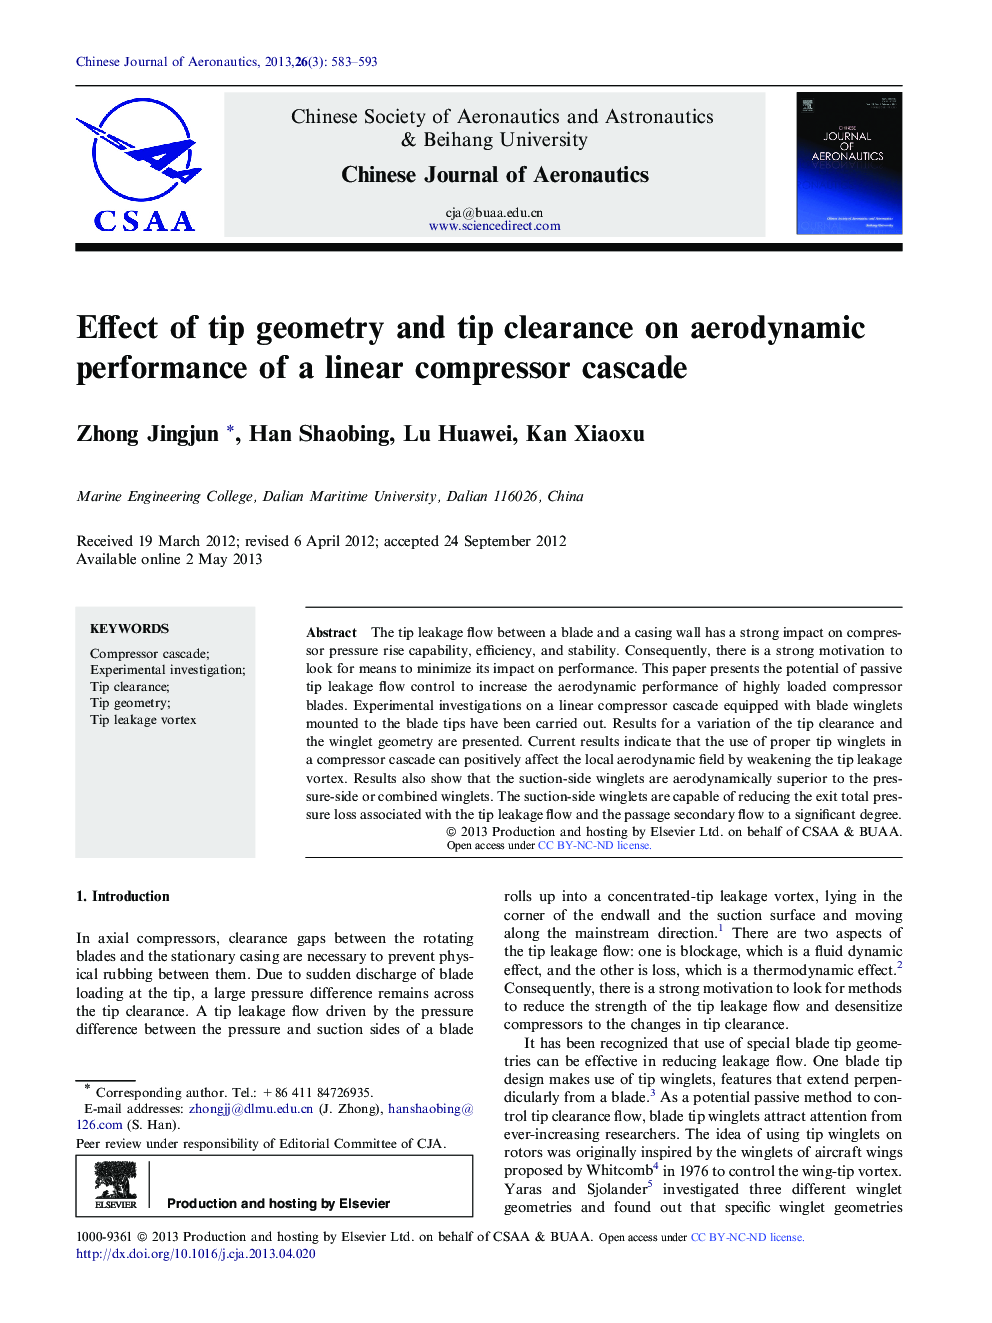 Effect of tip geometry and tip clearance on aerodynamic performance of a linear compressor cascade 